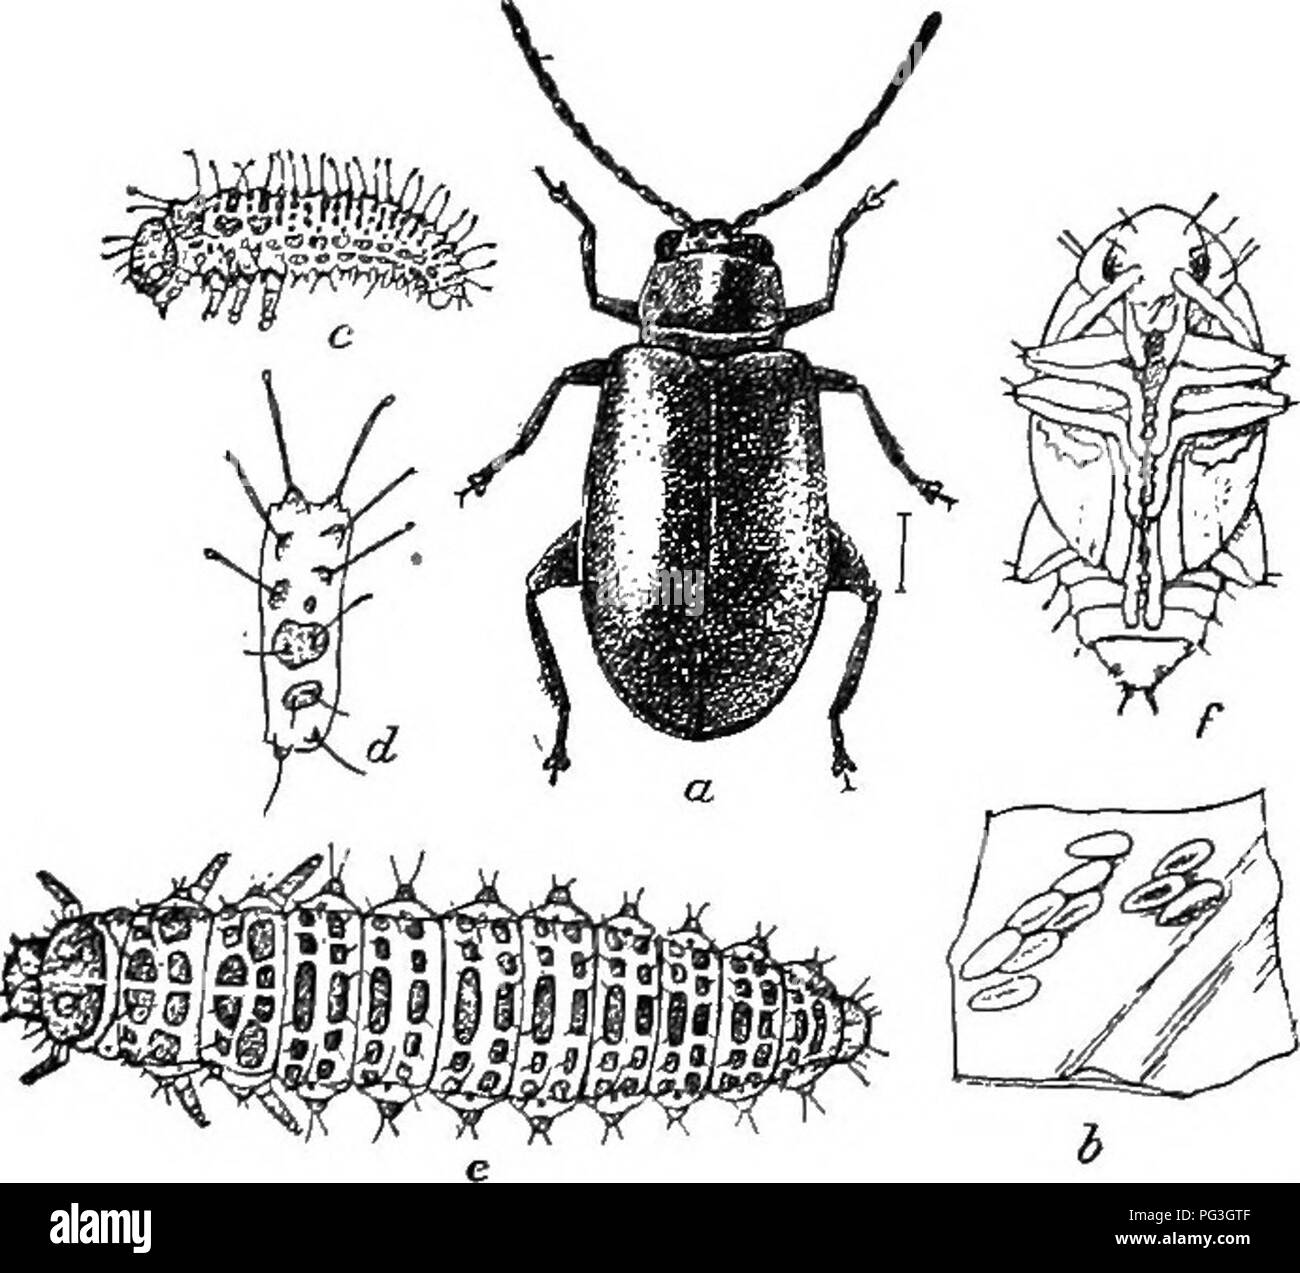 . An illustrated descriptive catalogue of the coleoptera or beetles (exclusive of the Rhynchophora) known to occur in Indiana : with bibliography and descriptions of new species . Beetles. THE IjEAF beetles. 1201 2221 (6960). Haitica bimakginata Say, Journ. Phil. Acad. Nat. Sci., IV, 1824, 85; ibid. II, 220. Oblong, subparallel. Above dark blue, moderately shining; under sur- face and legs blue-black, antennte piceous. Thorax one-half wider than long, margins very narrow, the ante-basal depression deep, reaching the sides and joining the marginal depression; surface distinctly alutaceous, spar Stock Photo